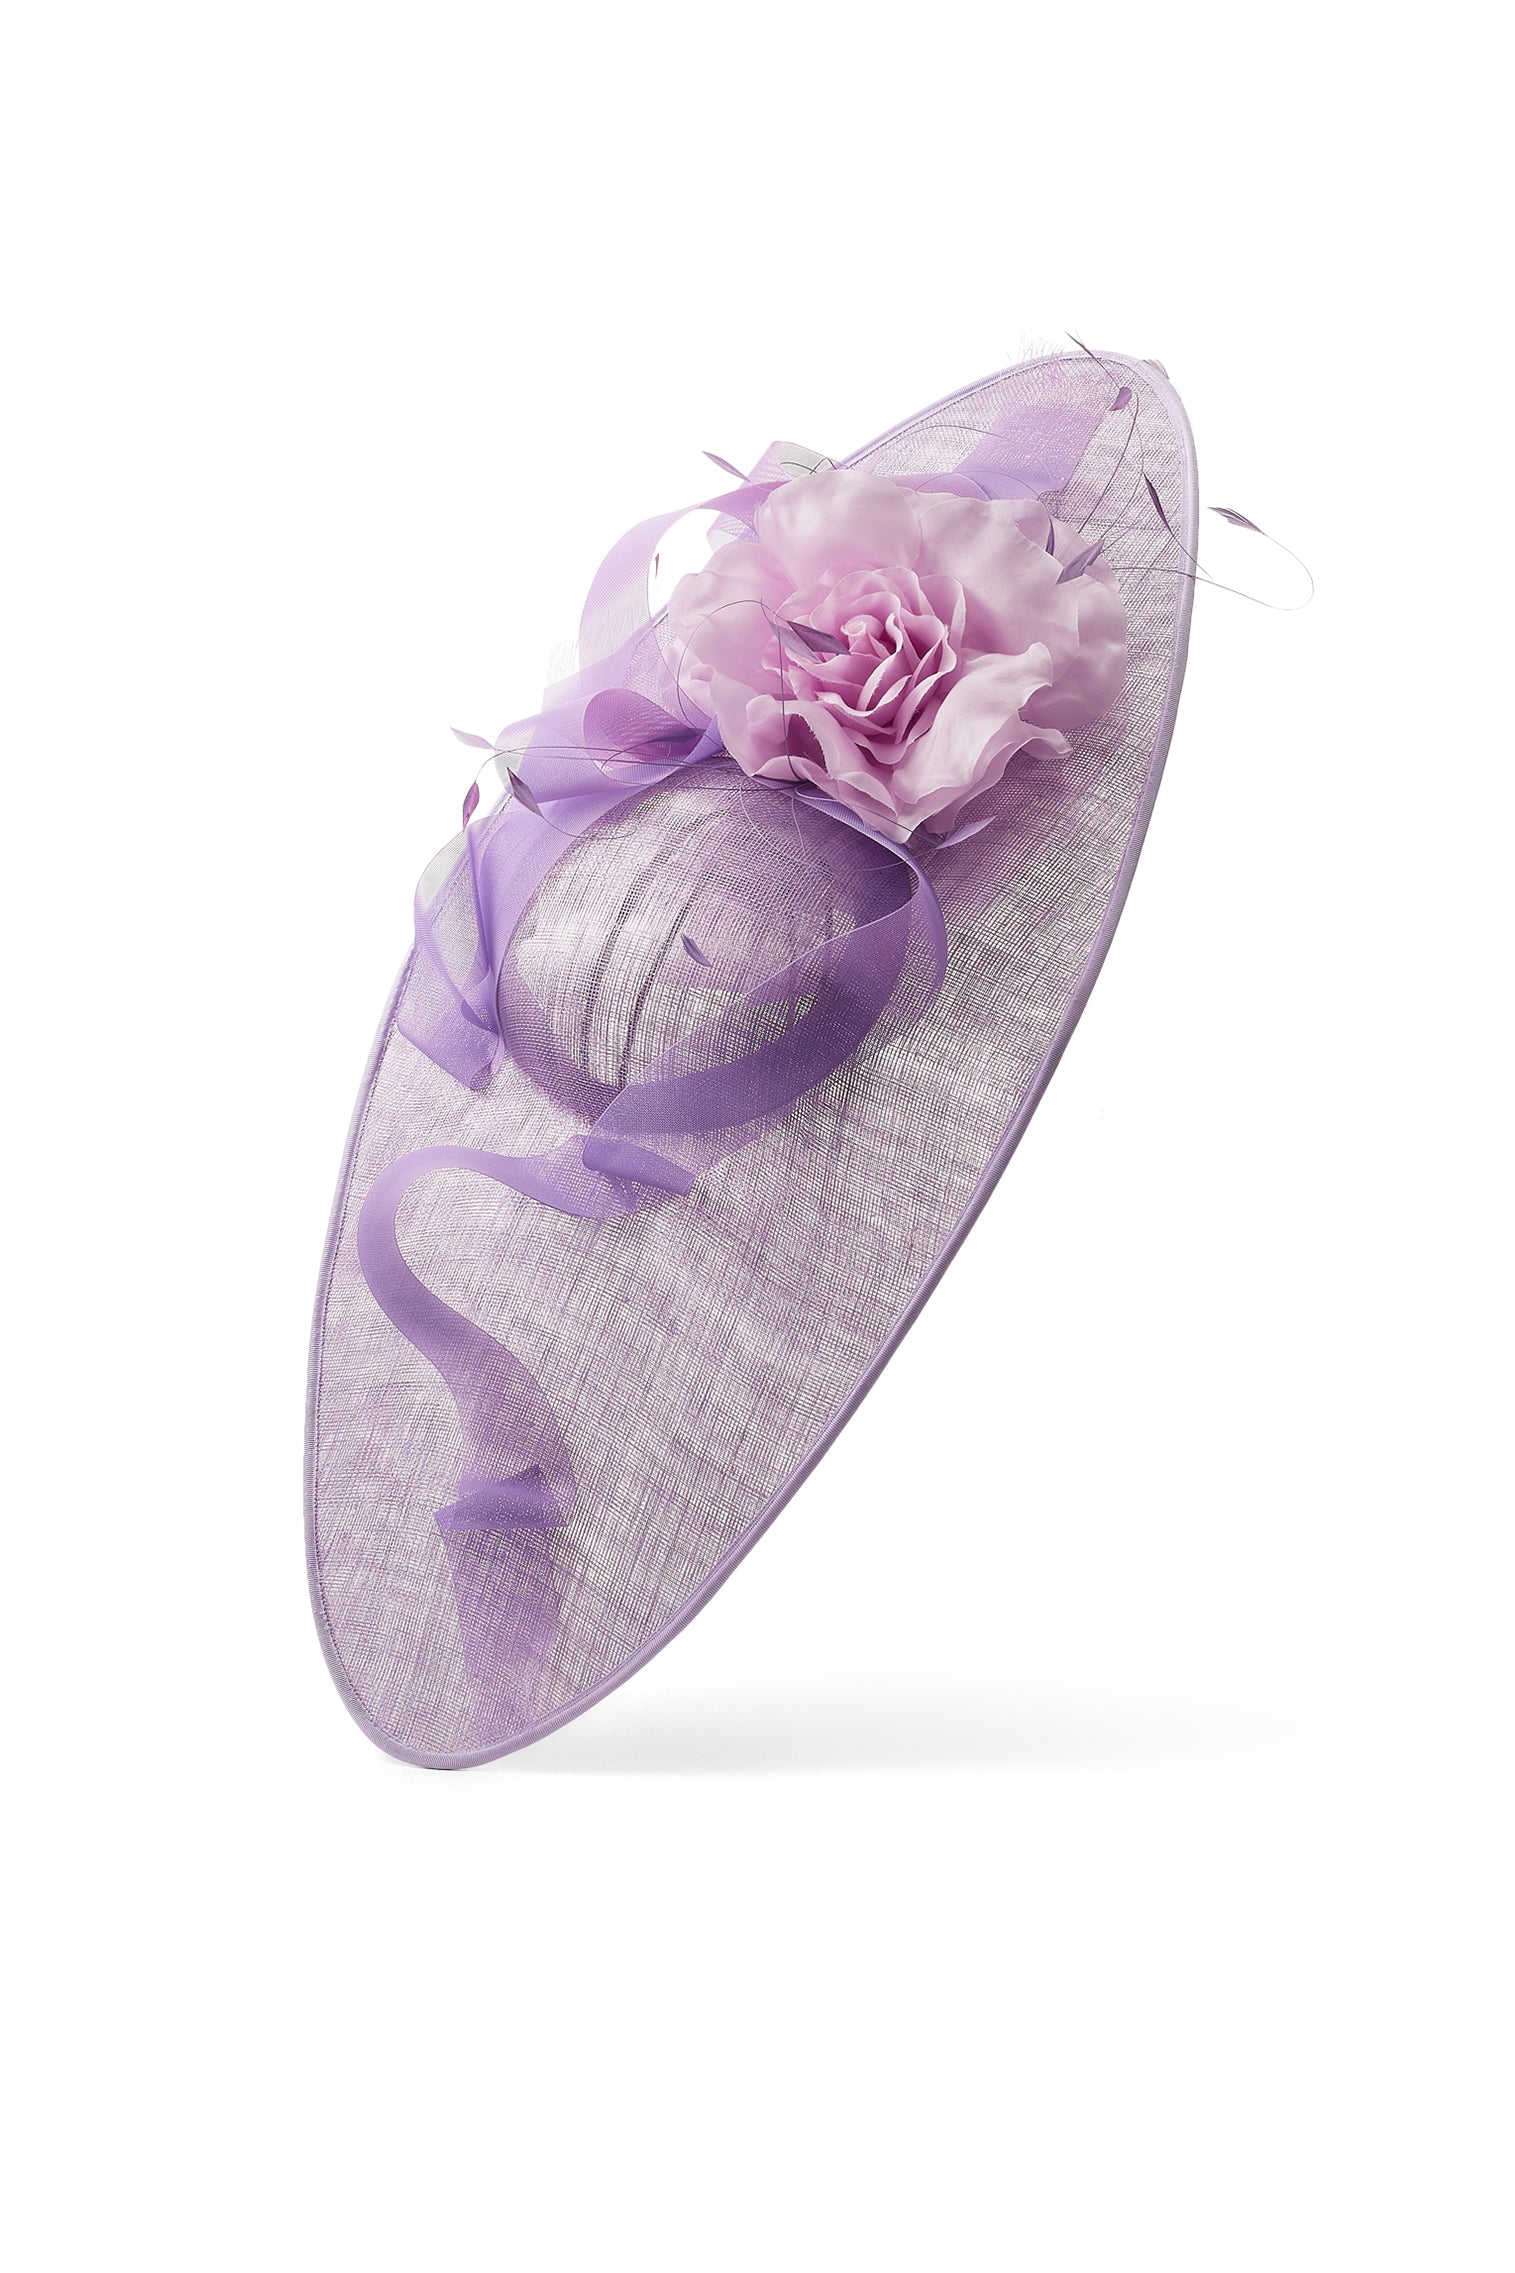 Vanilla Lilac Slice Hat - Lock Couture by Awon Golding - Lock & Co. Hatters London UK